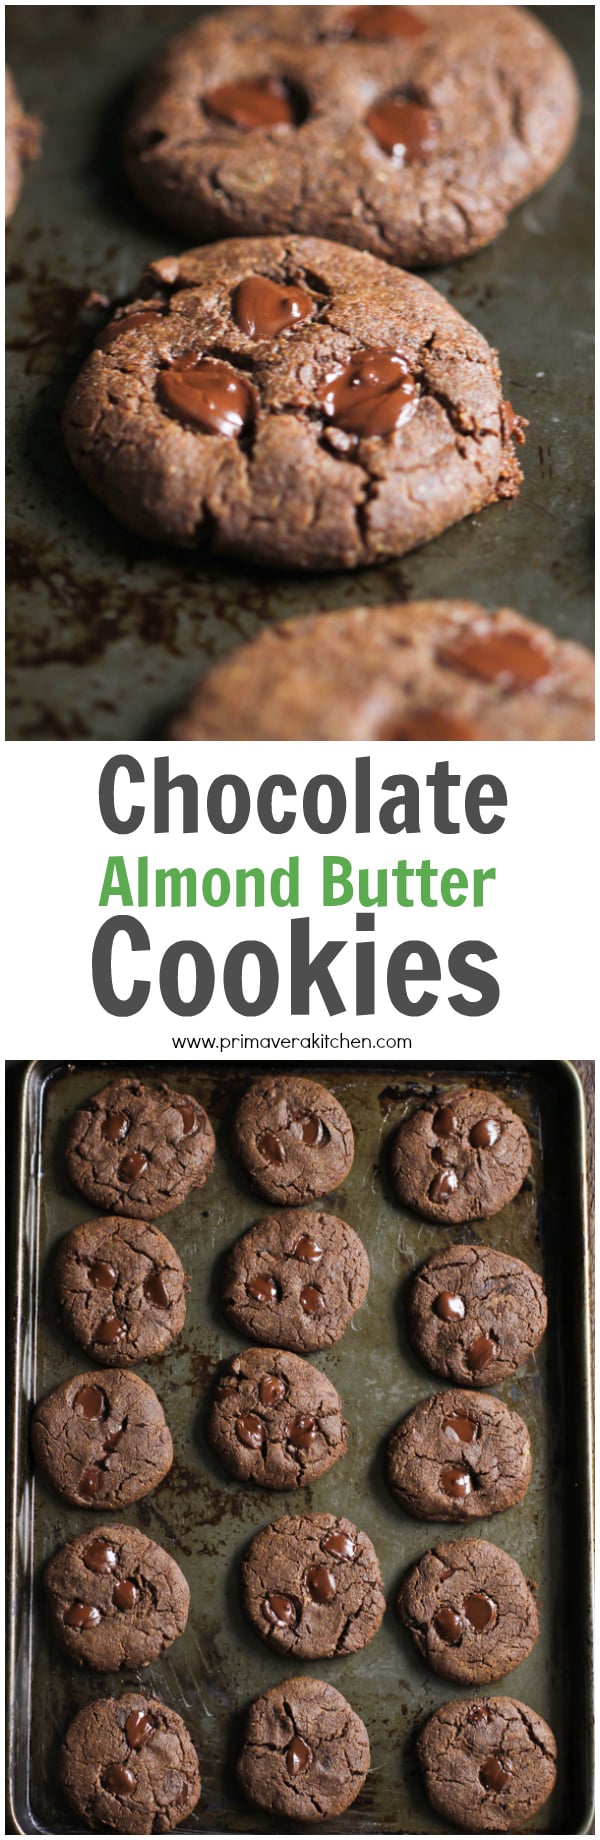 Chocolate Almond Butter Cookies - These gluten-free and Paleo Chocolate Almond Butter Cookies are made with few simple ingredients and it’s ready in 15 minutes. | www.primaverakitchen.com